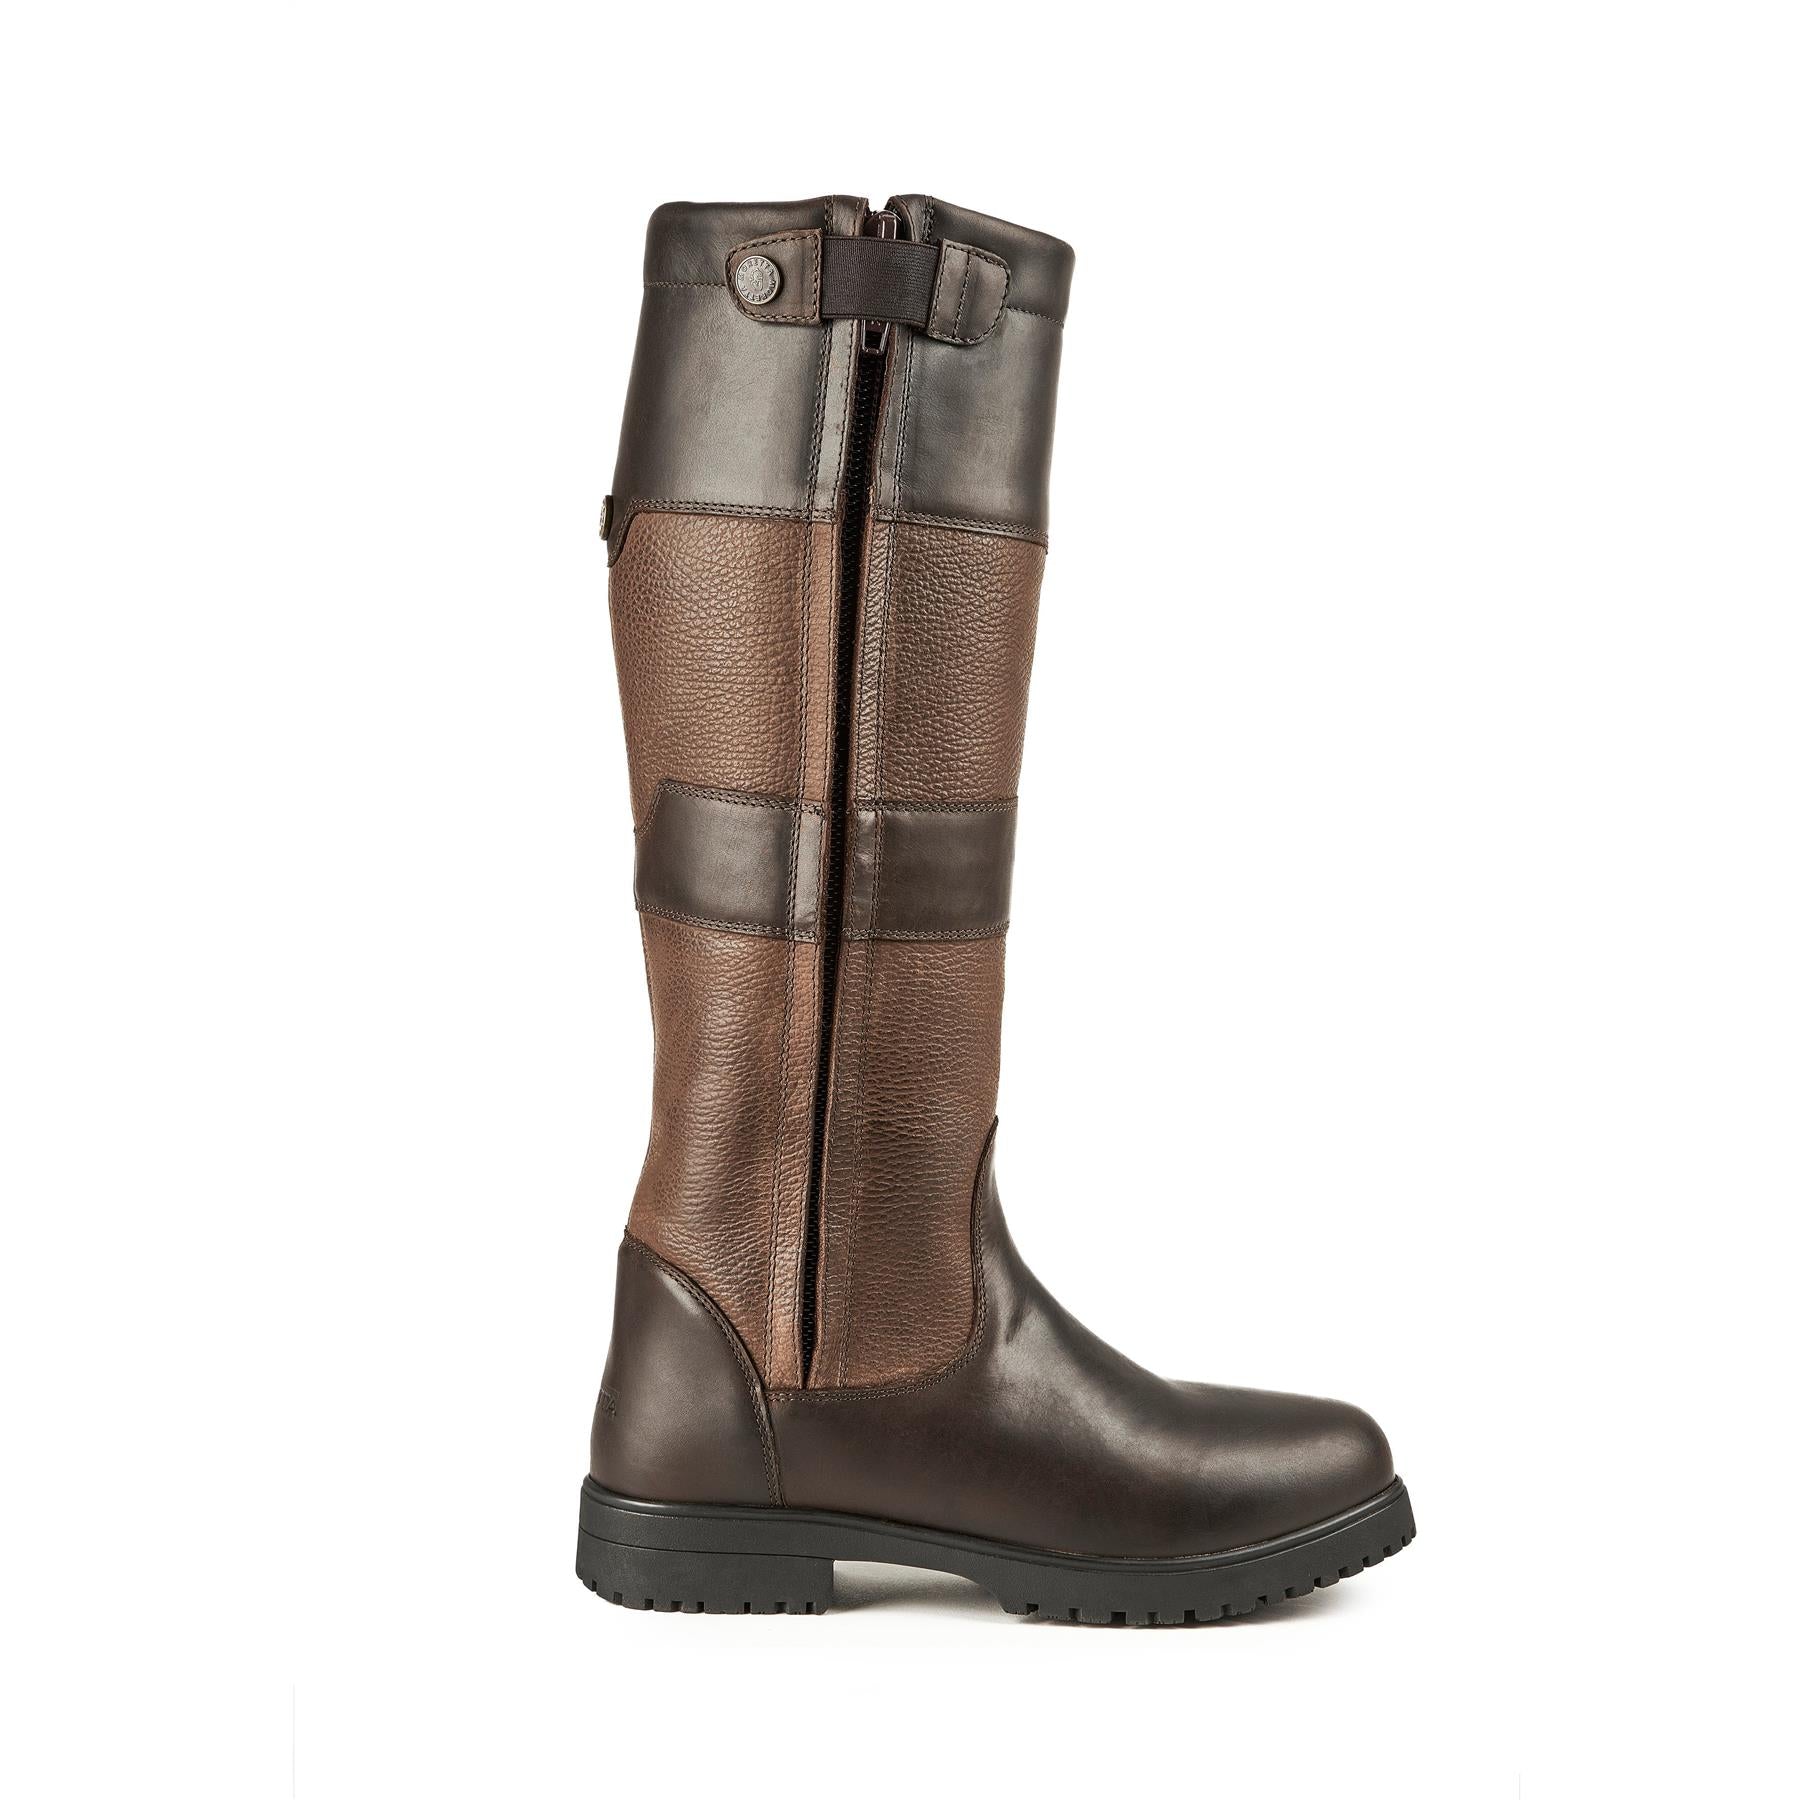 Shires Moretta Bella II Country Boots - Just Horse Riders